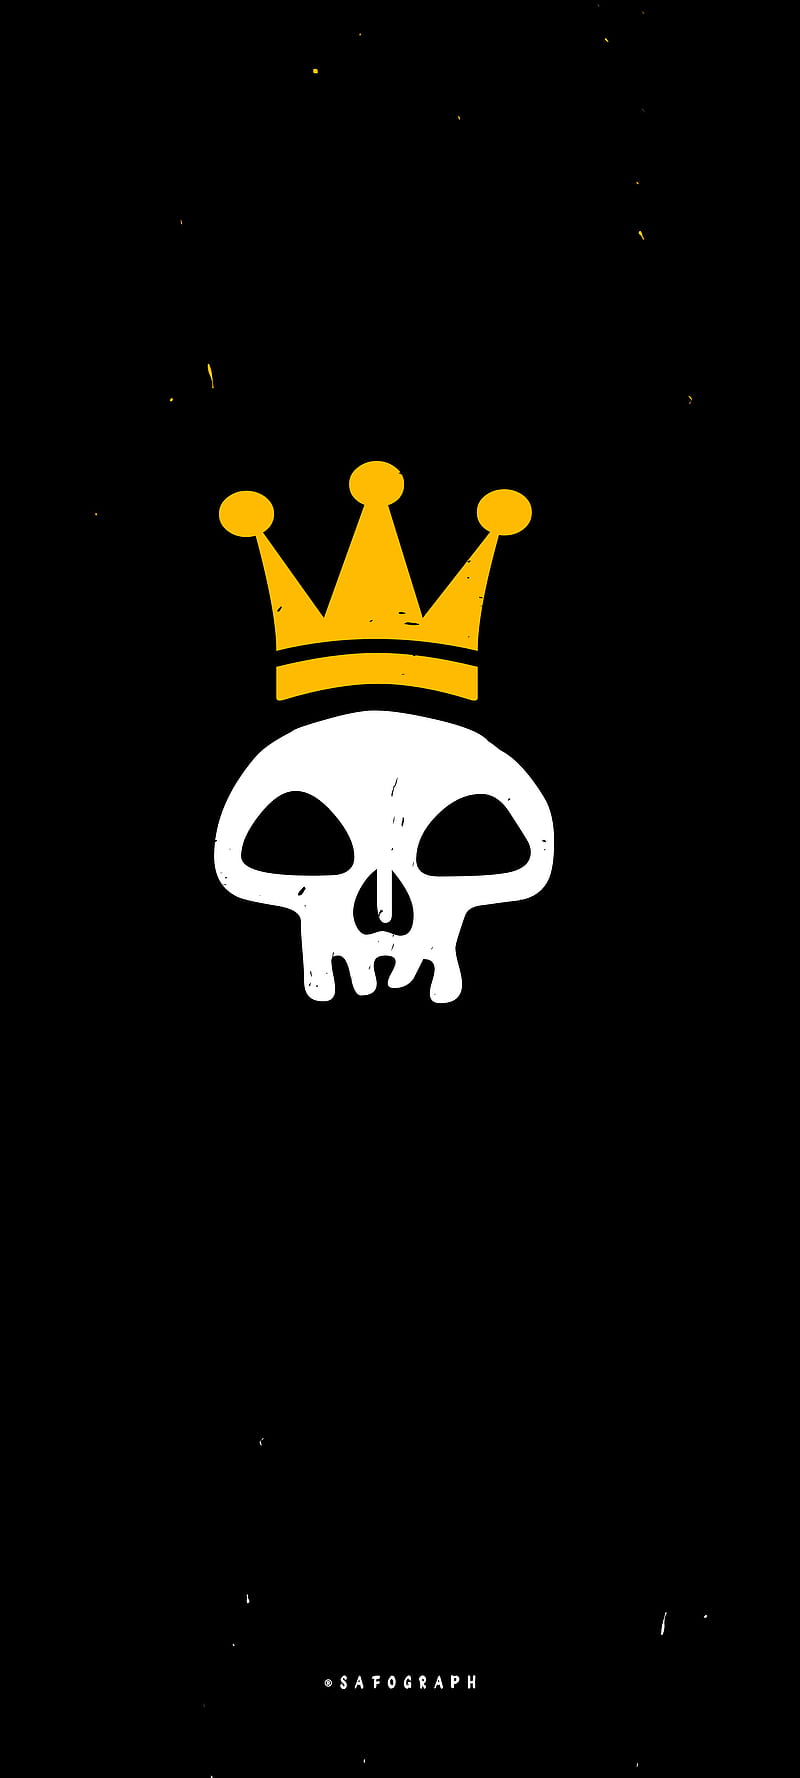 tribal skull with crown